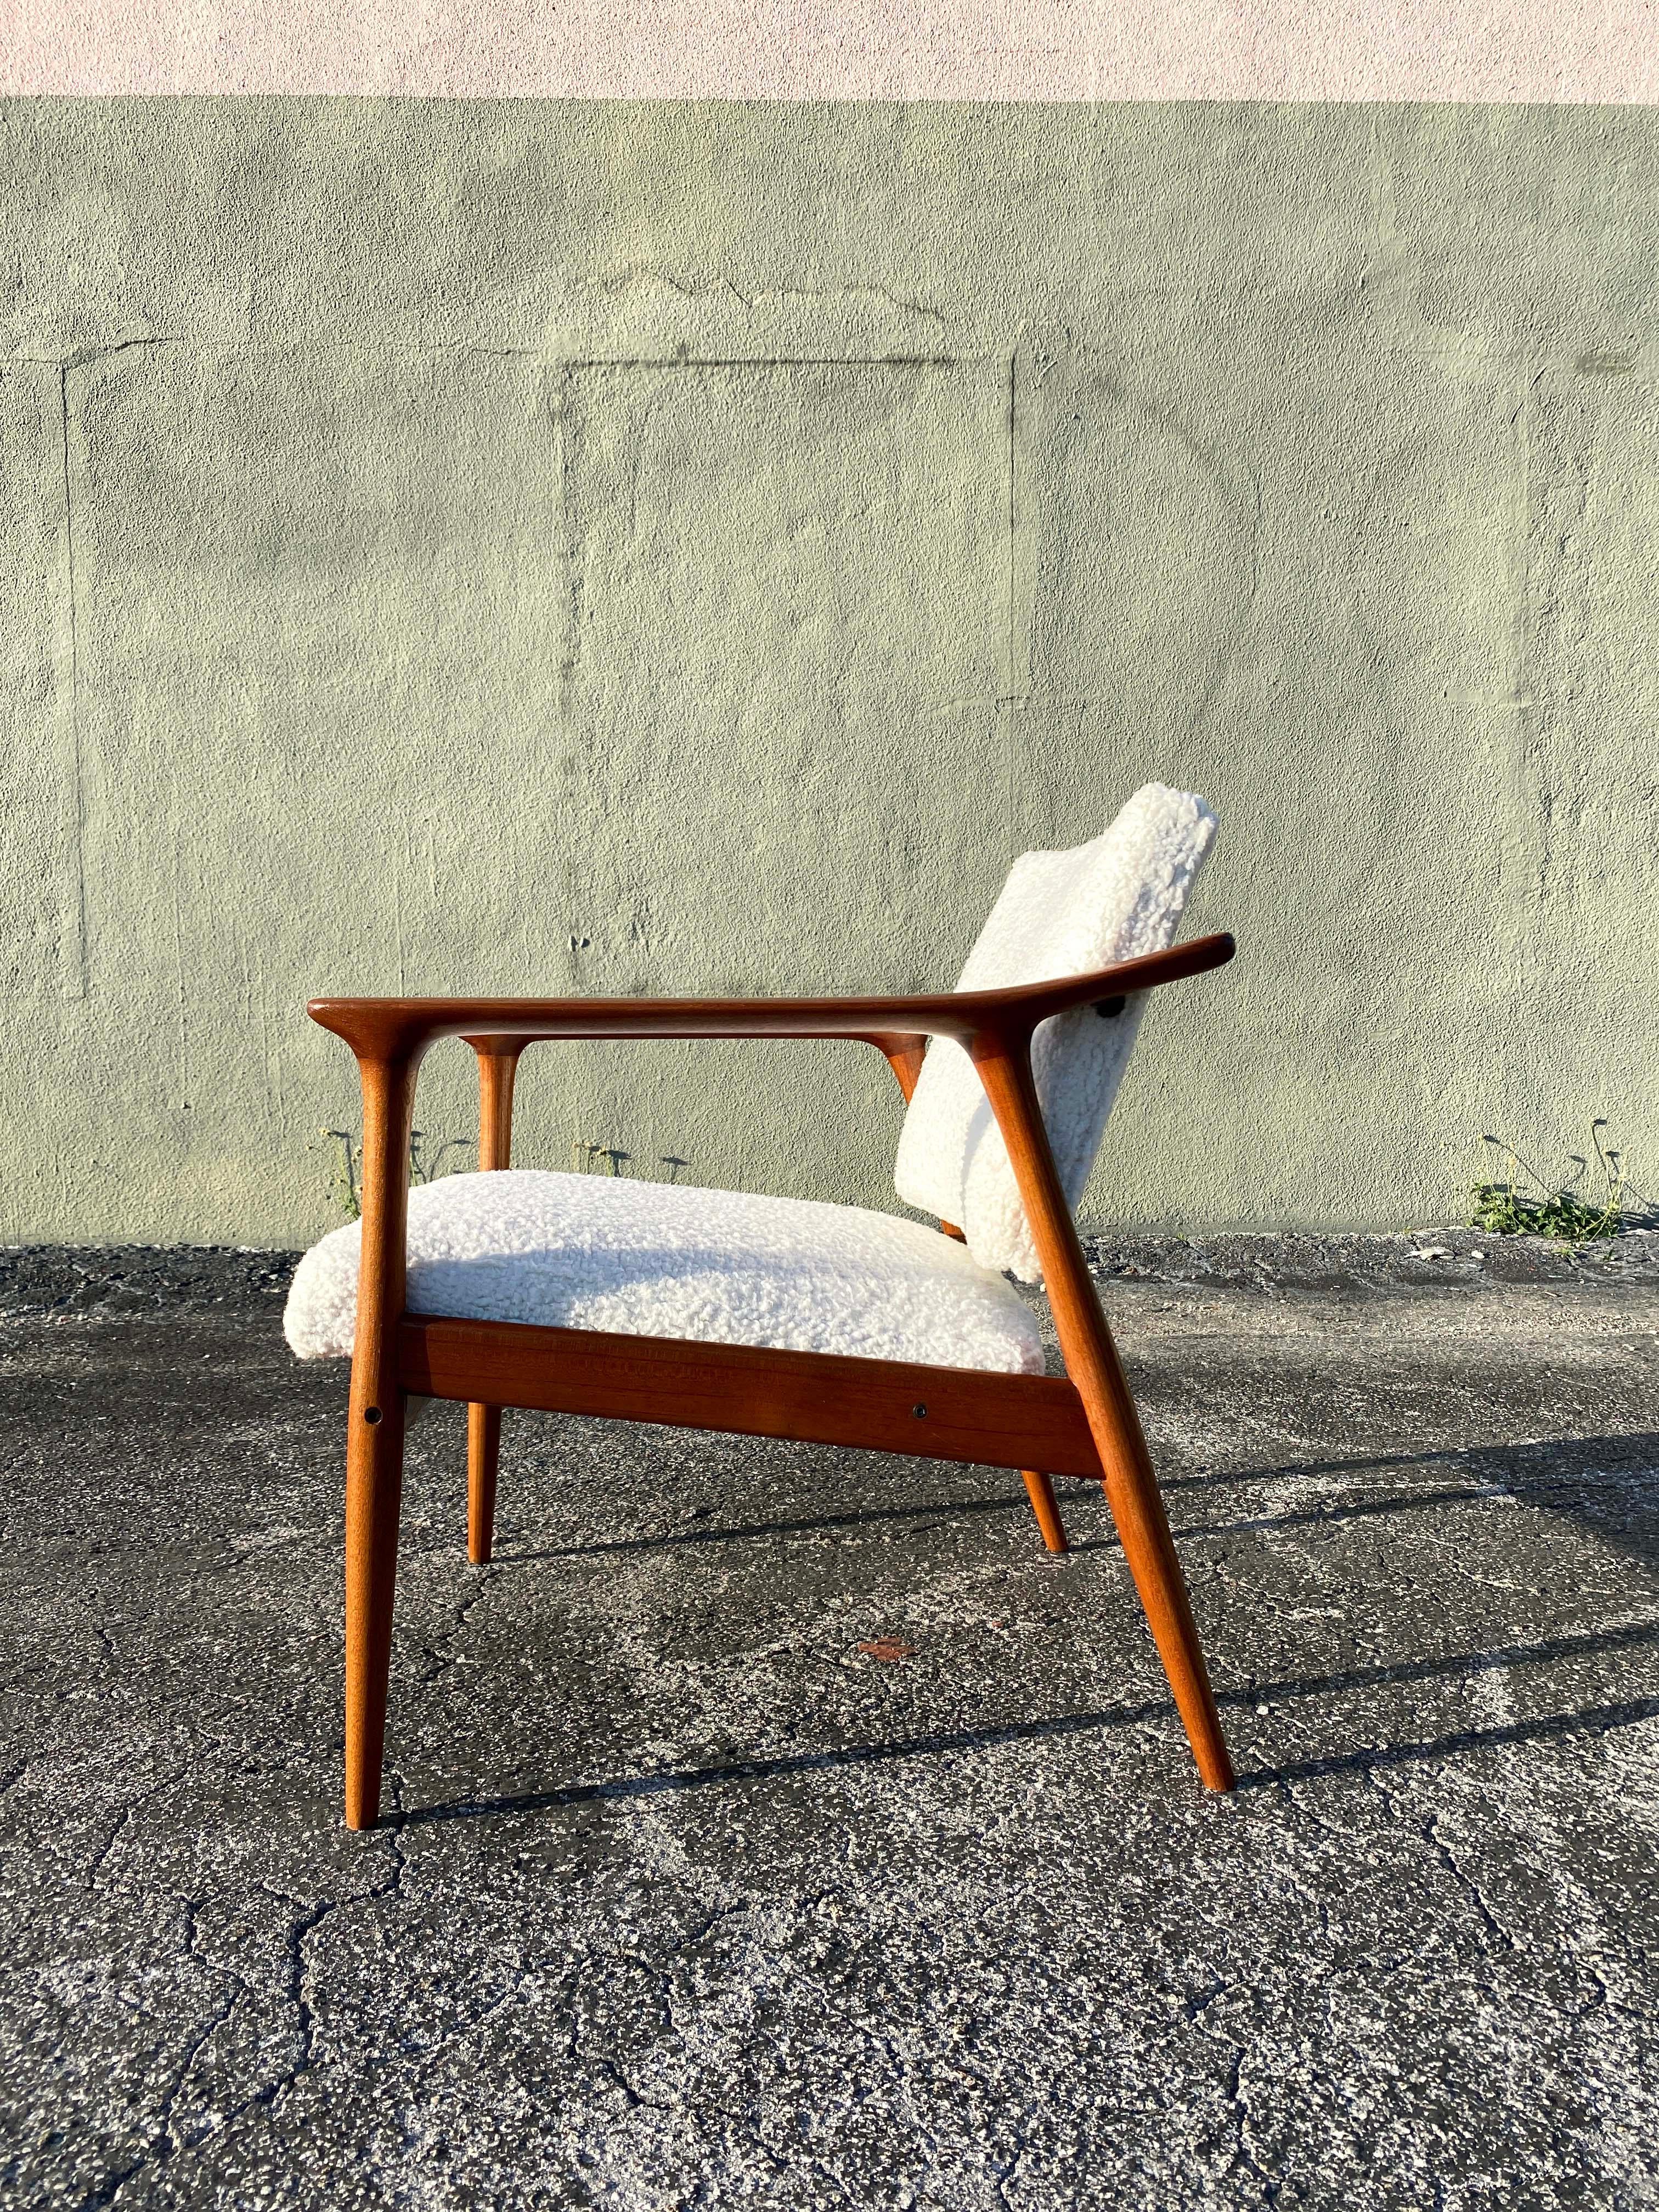 The ‘Tono’ chair was designed by Torbjorn Afdal and the Norwegian manufacturer Sandvik Mobler produced it in the 1950s. It features a sturdy walnut frame and newly reupholstered white boucle.

Measures: 26” W x 28” D x 28” H x 15.75” Seat H.